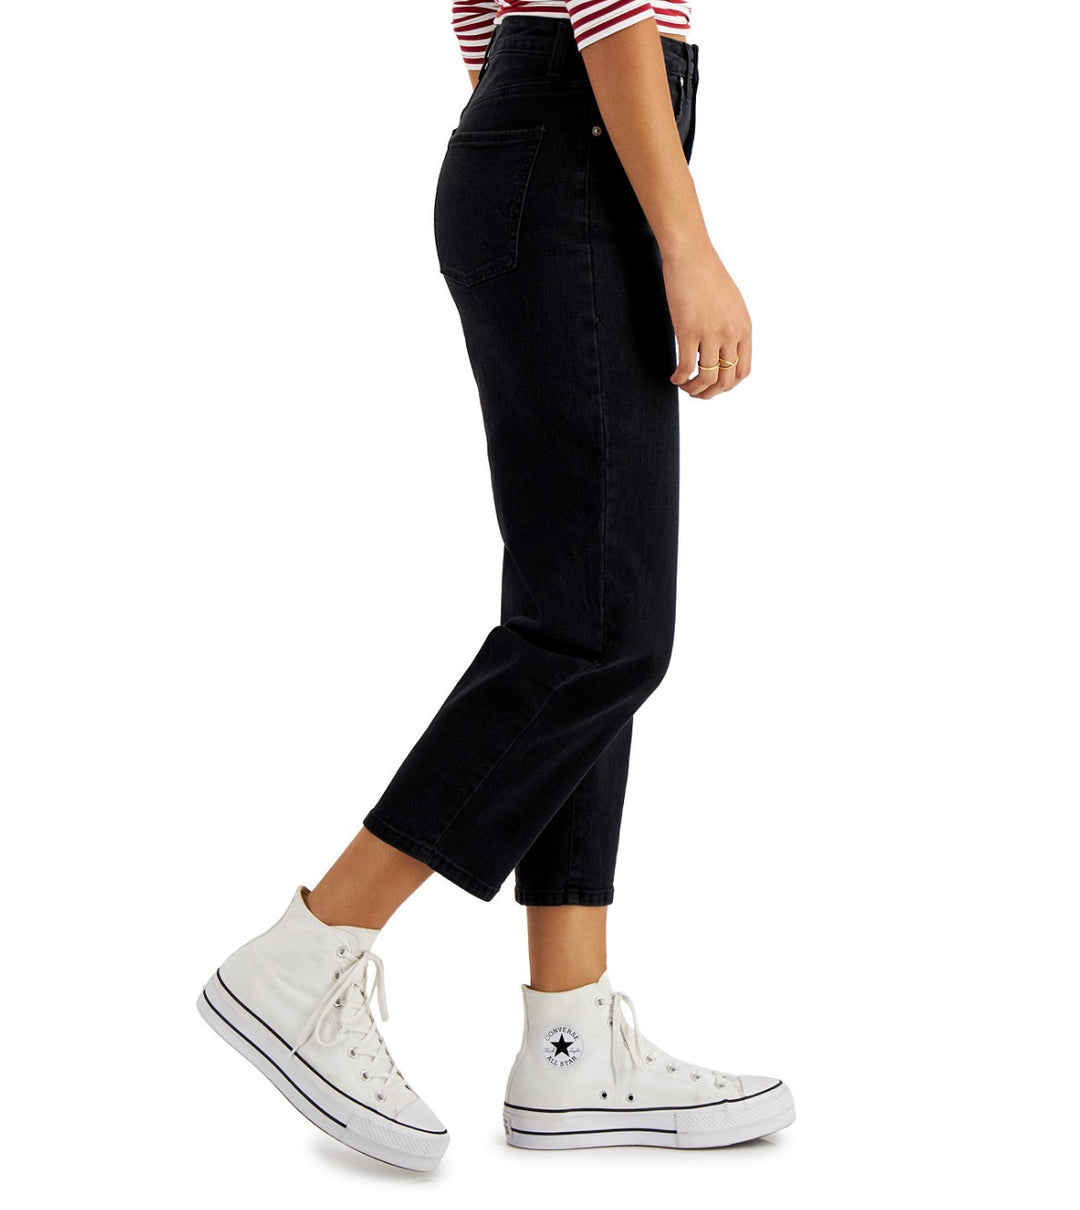 Style & Co. Women's Petite High-Rise Vintage-Classic Mom Jeans Washed Black